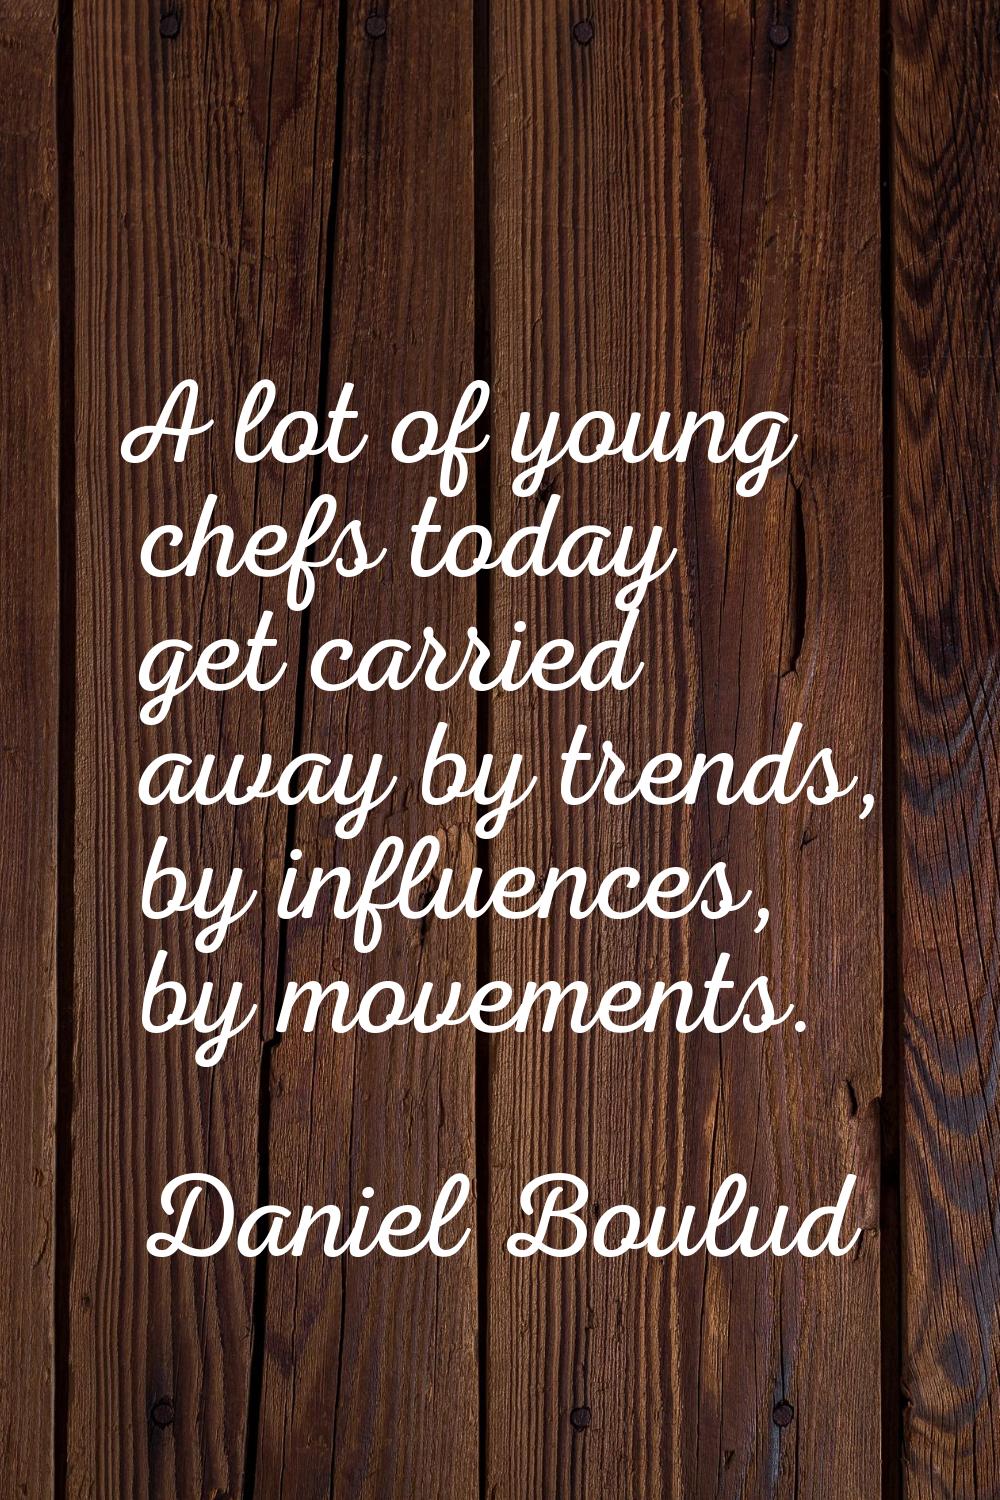 A lot of young chefs today get carried away by trends, by influences, by movements.